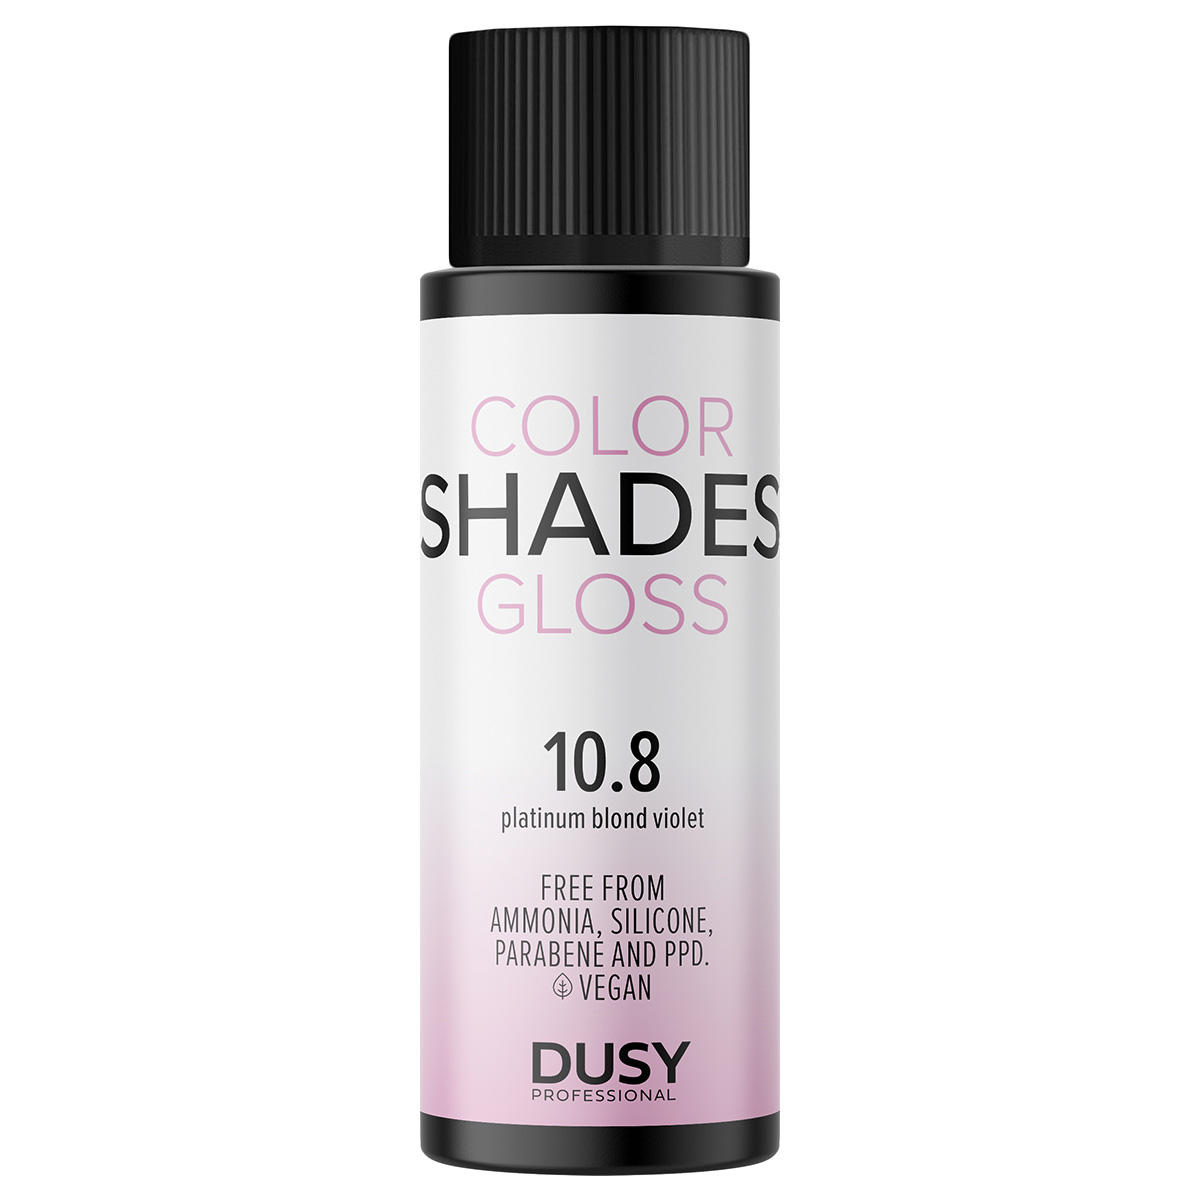 dusy professional Color Shades Gloss 10.8 Platin Blond Violett 60 ml - 1